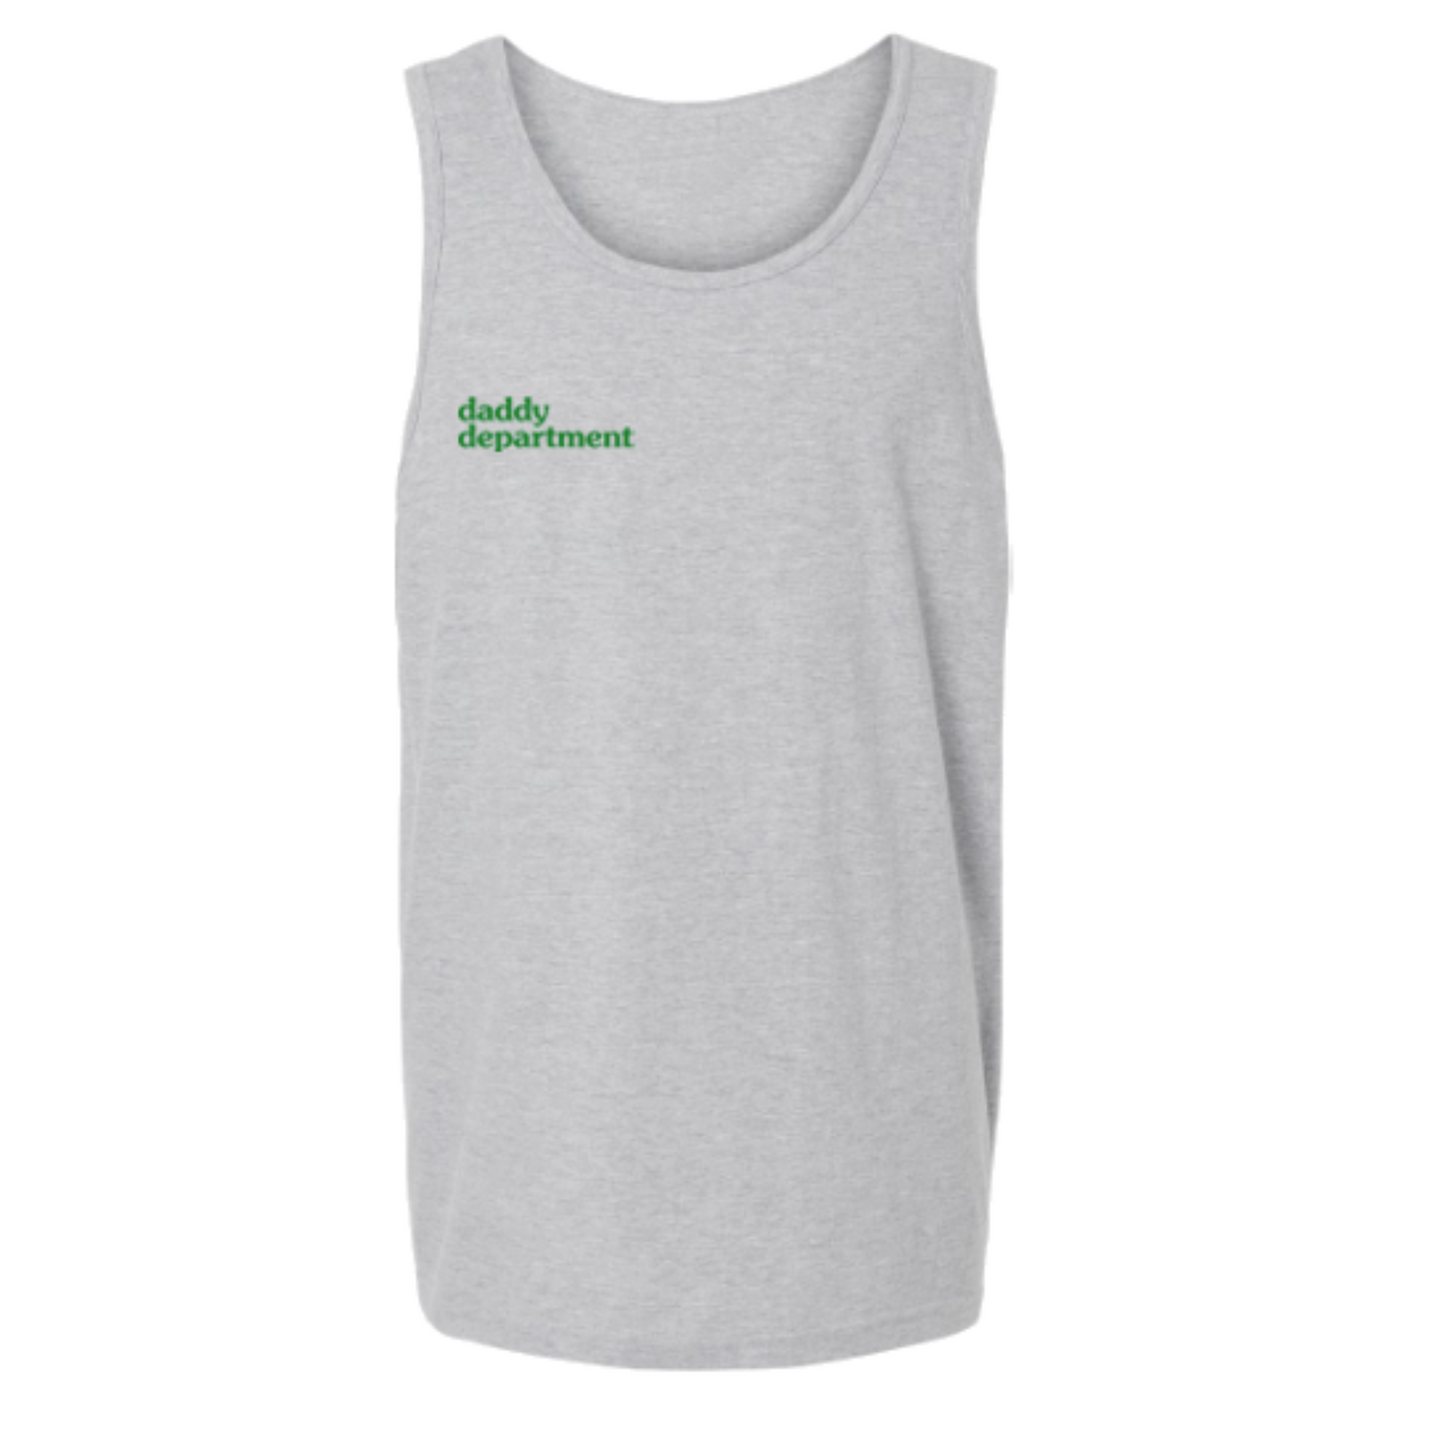 Daddy Department Tank Tops - Sports Grey